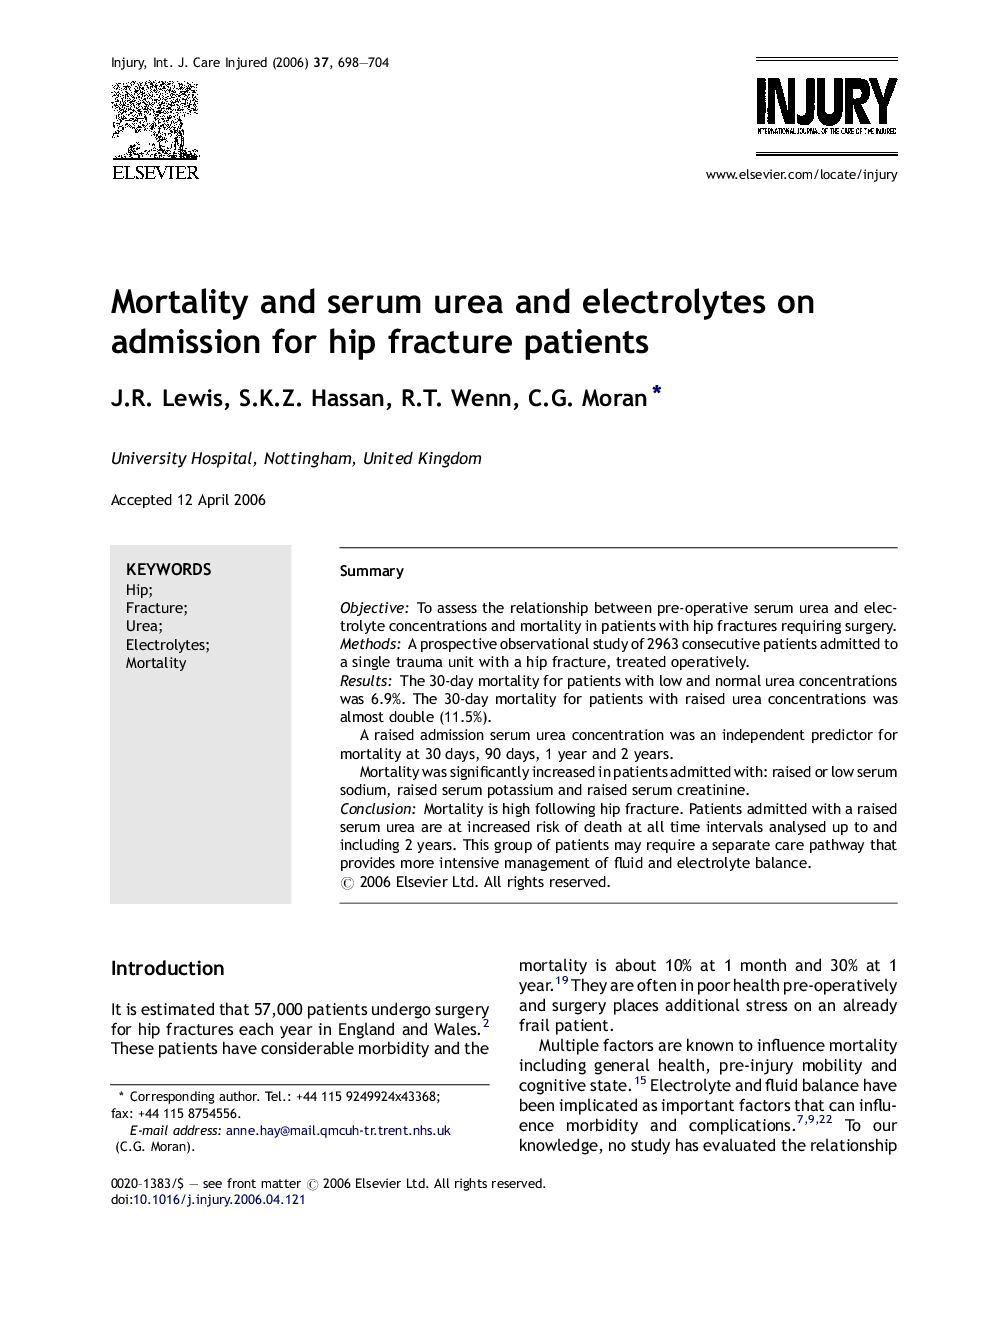 Mortality and serum urea and electrolytes on admission for hip fracture patients